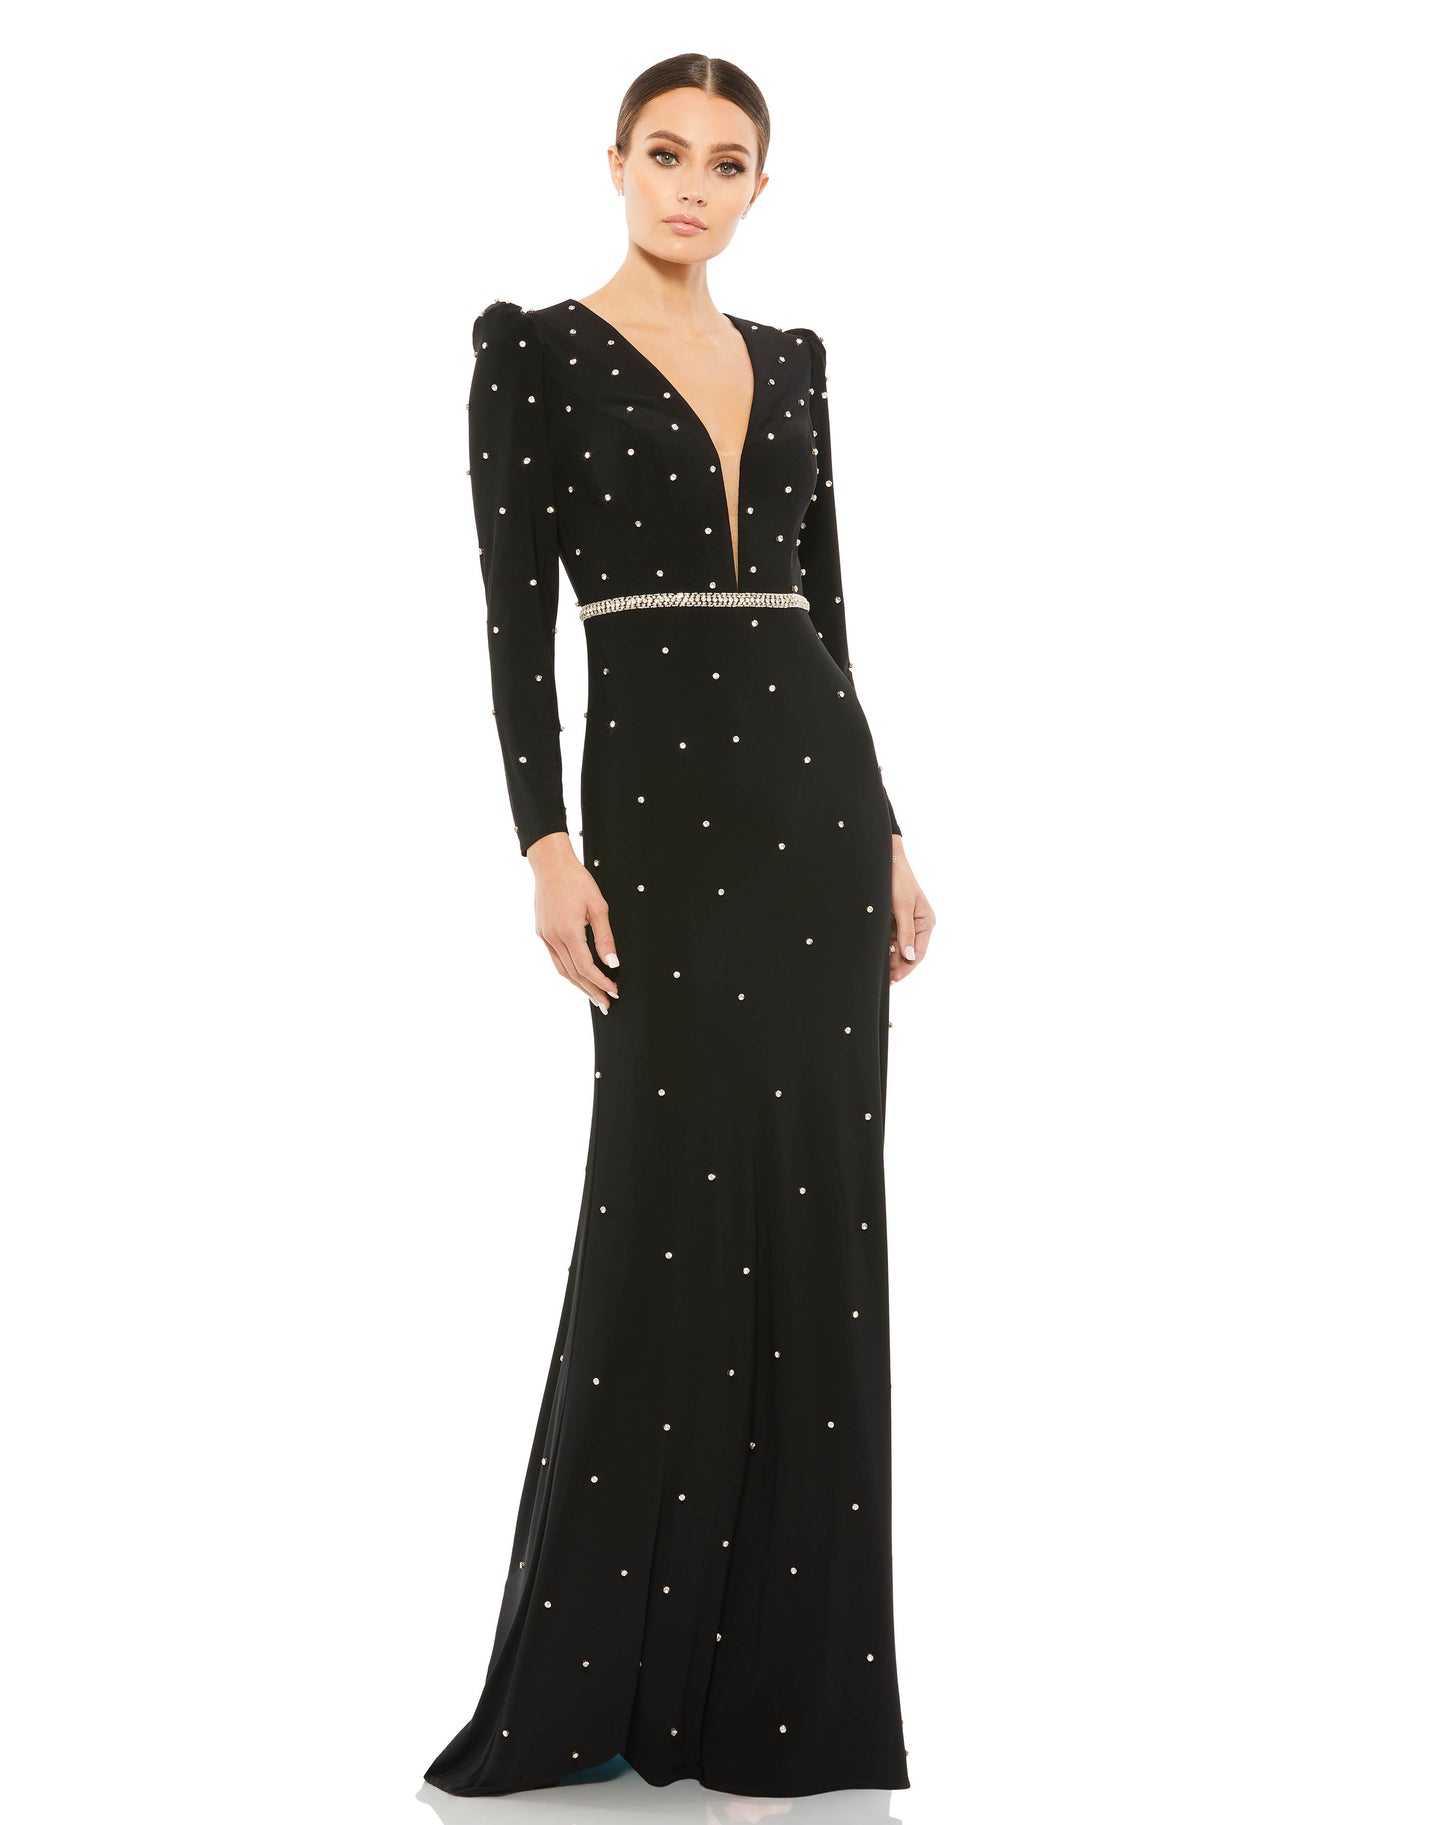 Ieena for Mac Duggal Jersey fabric (100% polyester) Fully lined through body Plunging v-neckline Long sleeves Mesh bust inset Puff shoulders All-over jewel encrusted embellishments Rhinestone detailed waist Concealed back zipper Approx. 62.5" from top of